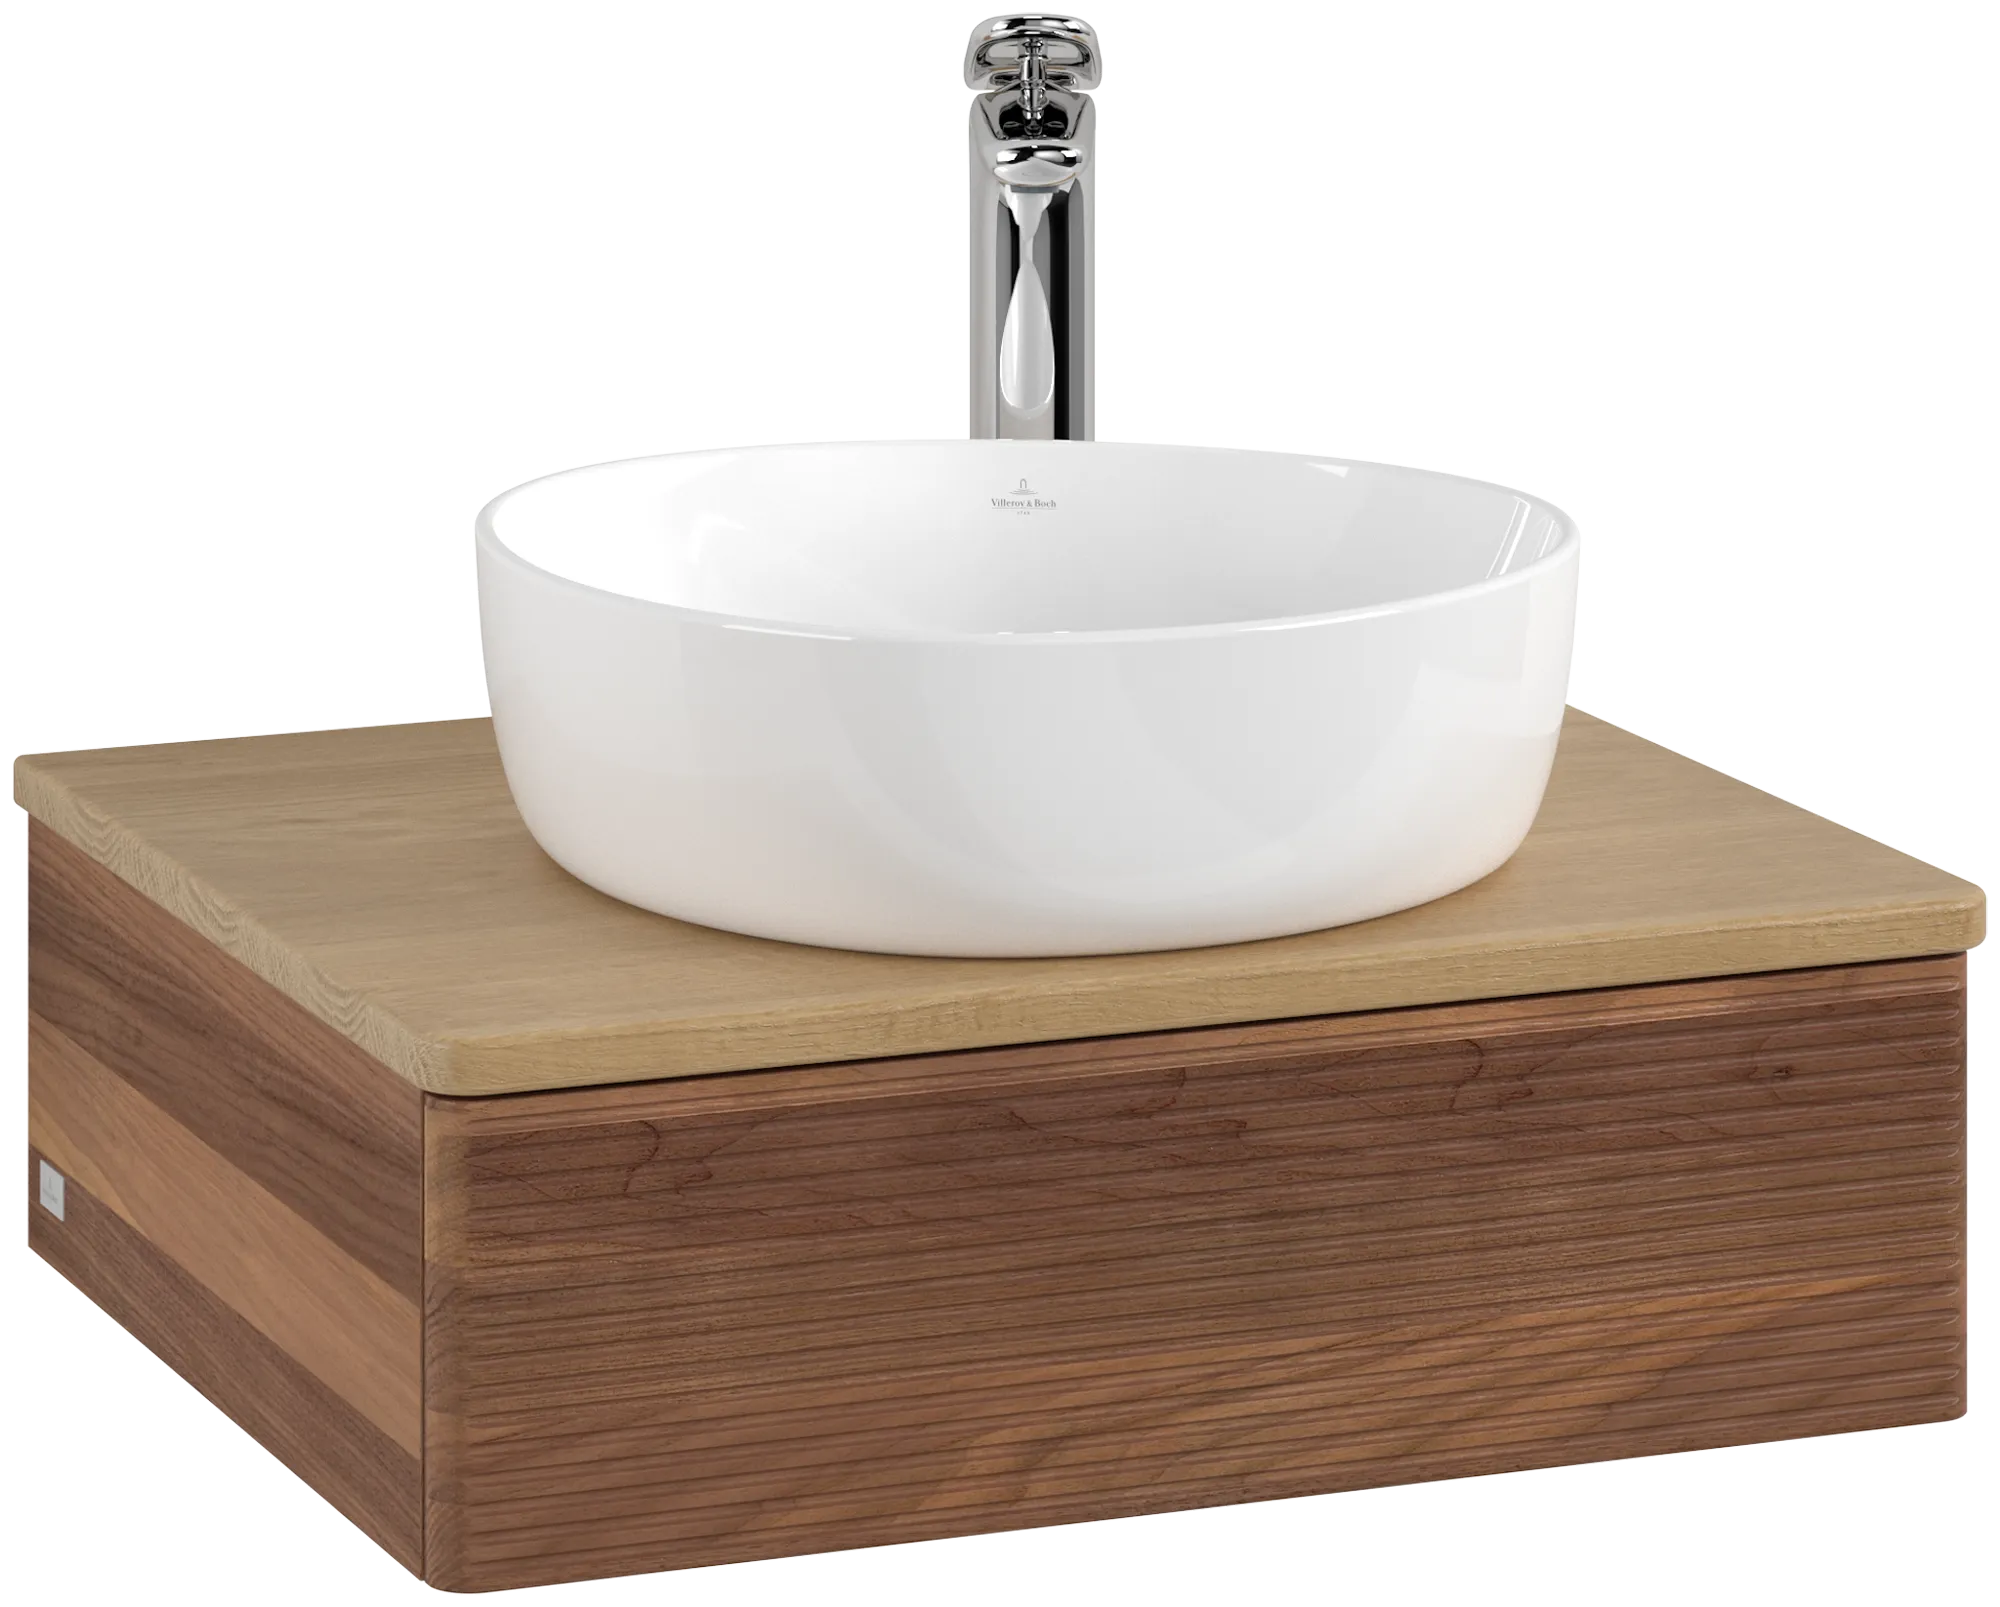 Picture of VILLEROY BOCH Antao Vanity unit, with lighting, 1 pull-out compartment, 600 x 190 x 500 mm, Front with grain texture, Warm Walnut / Honey Oak #L07151HM